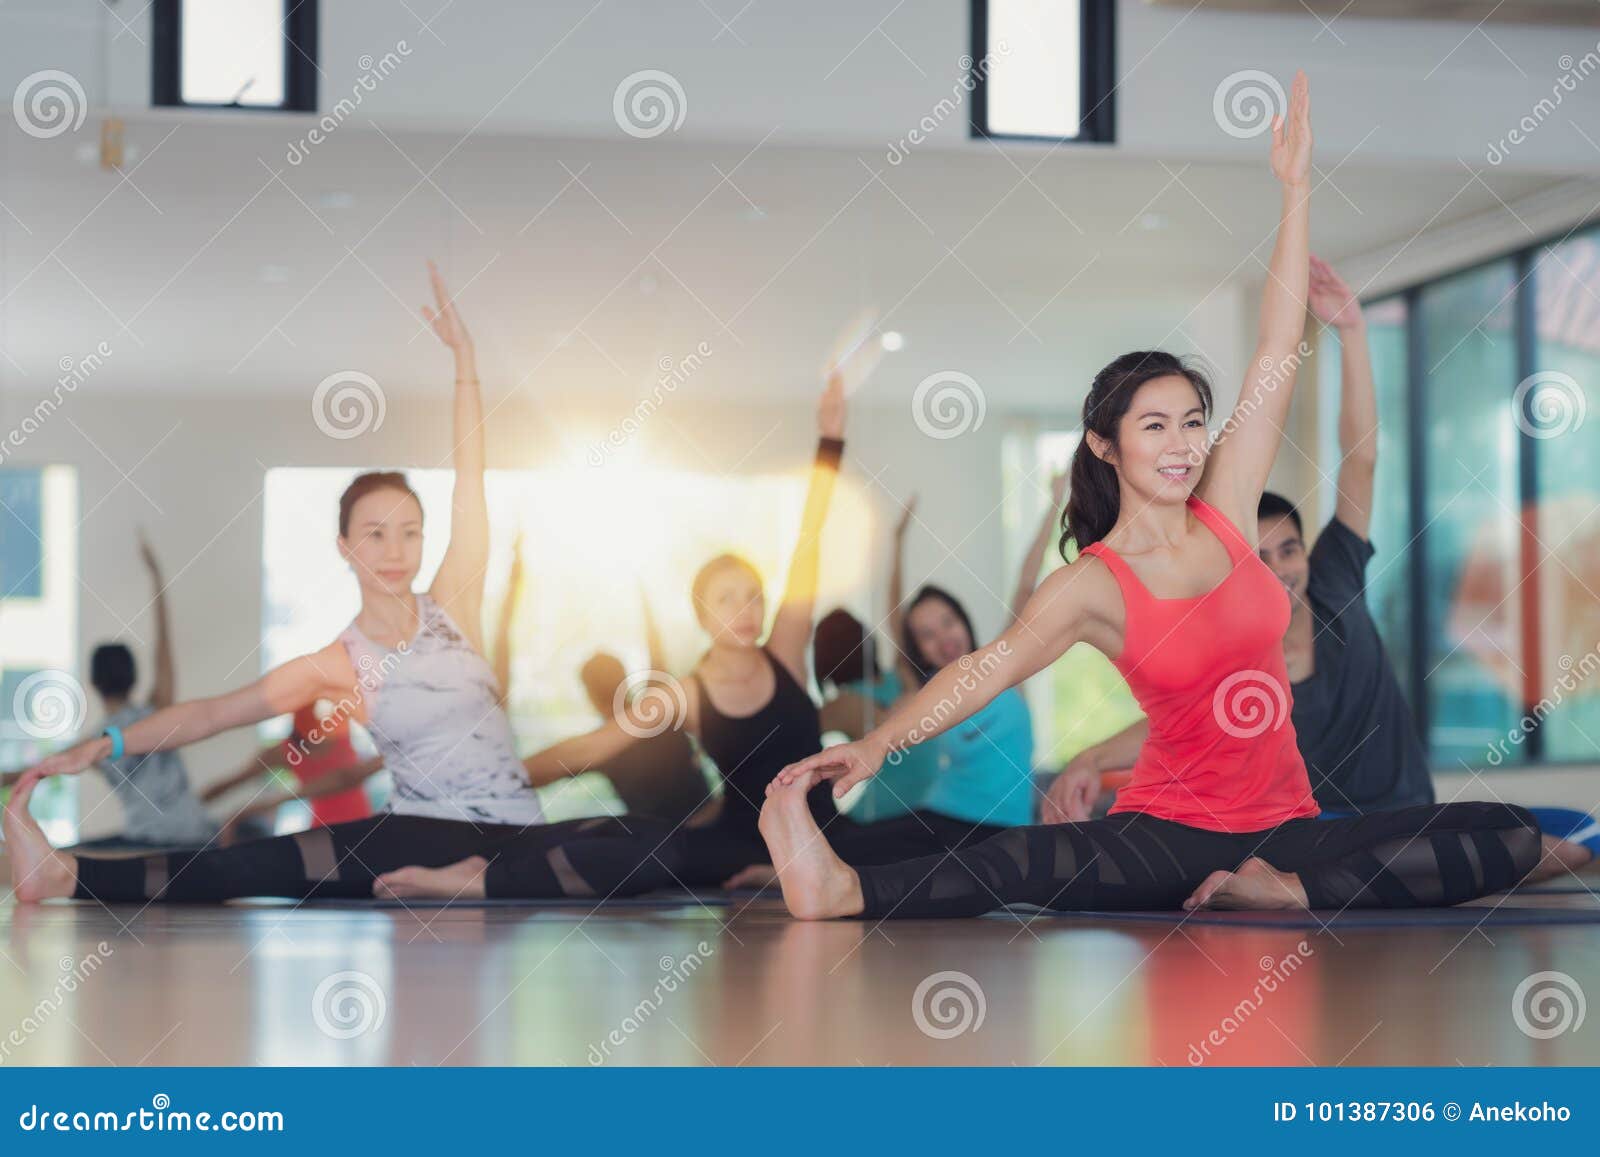 group of yoga exercise and class in fitness center